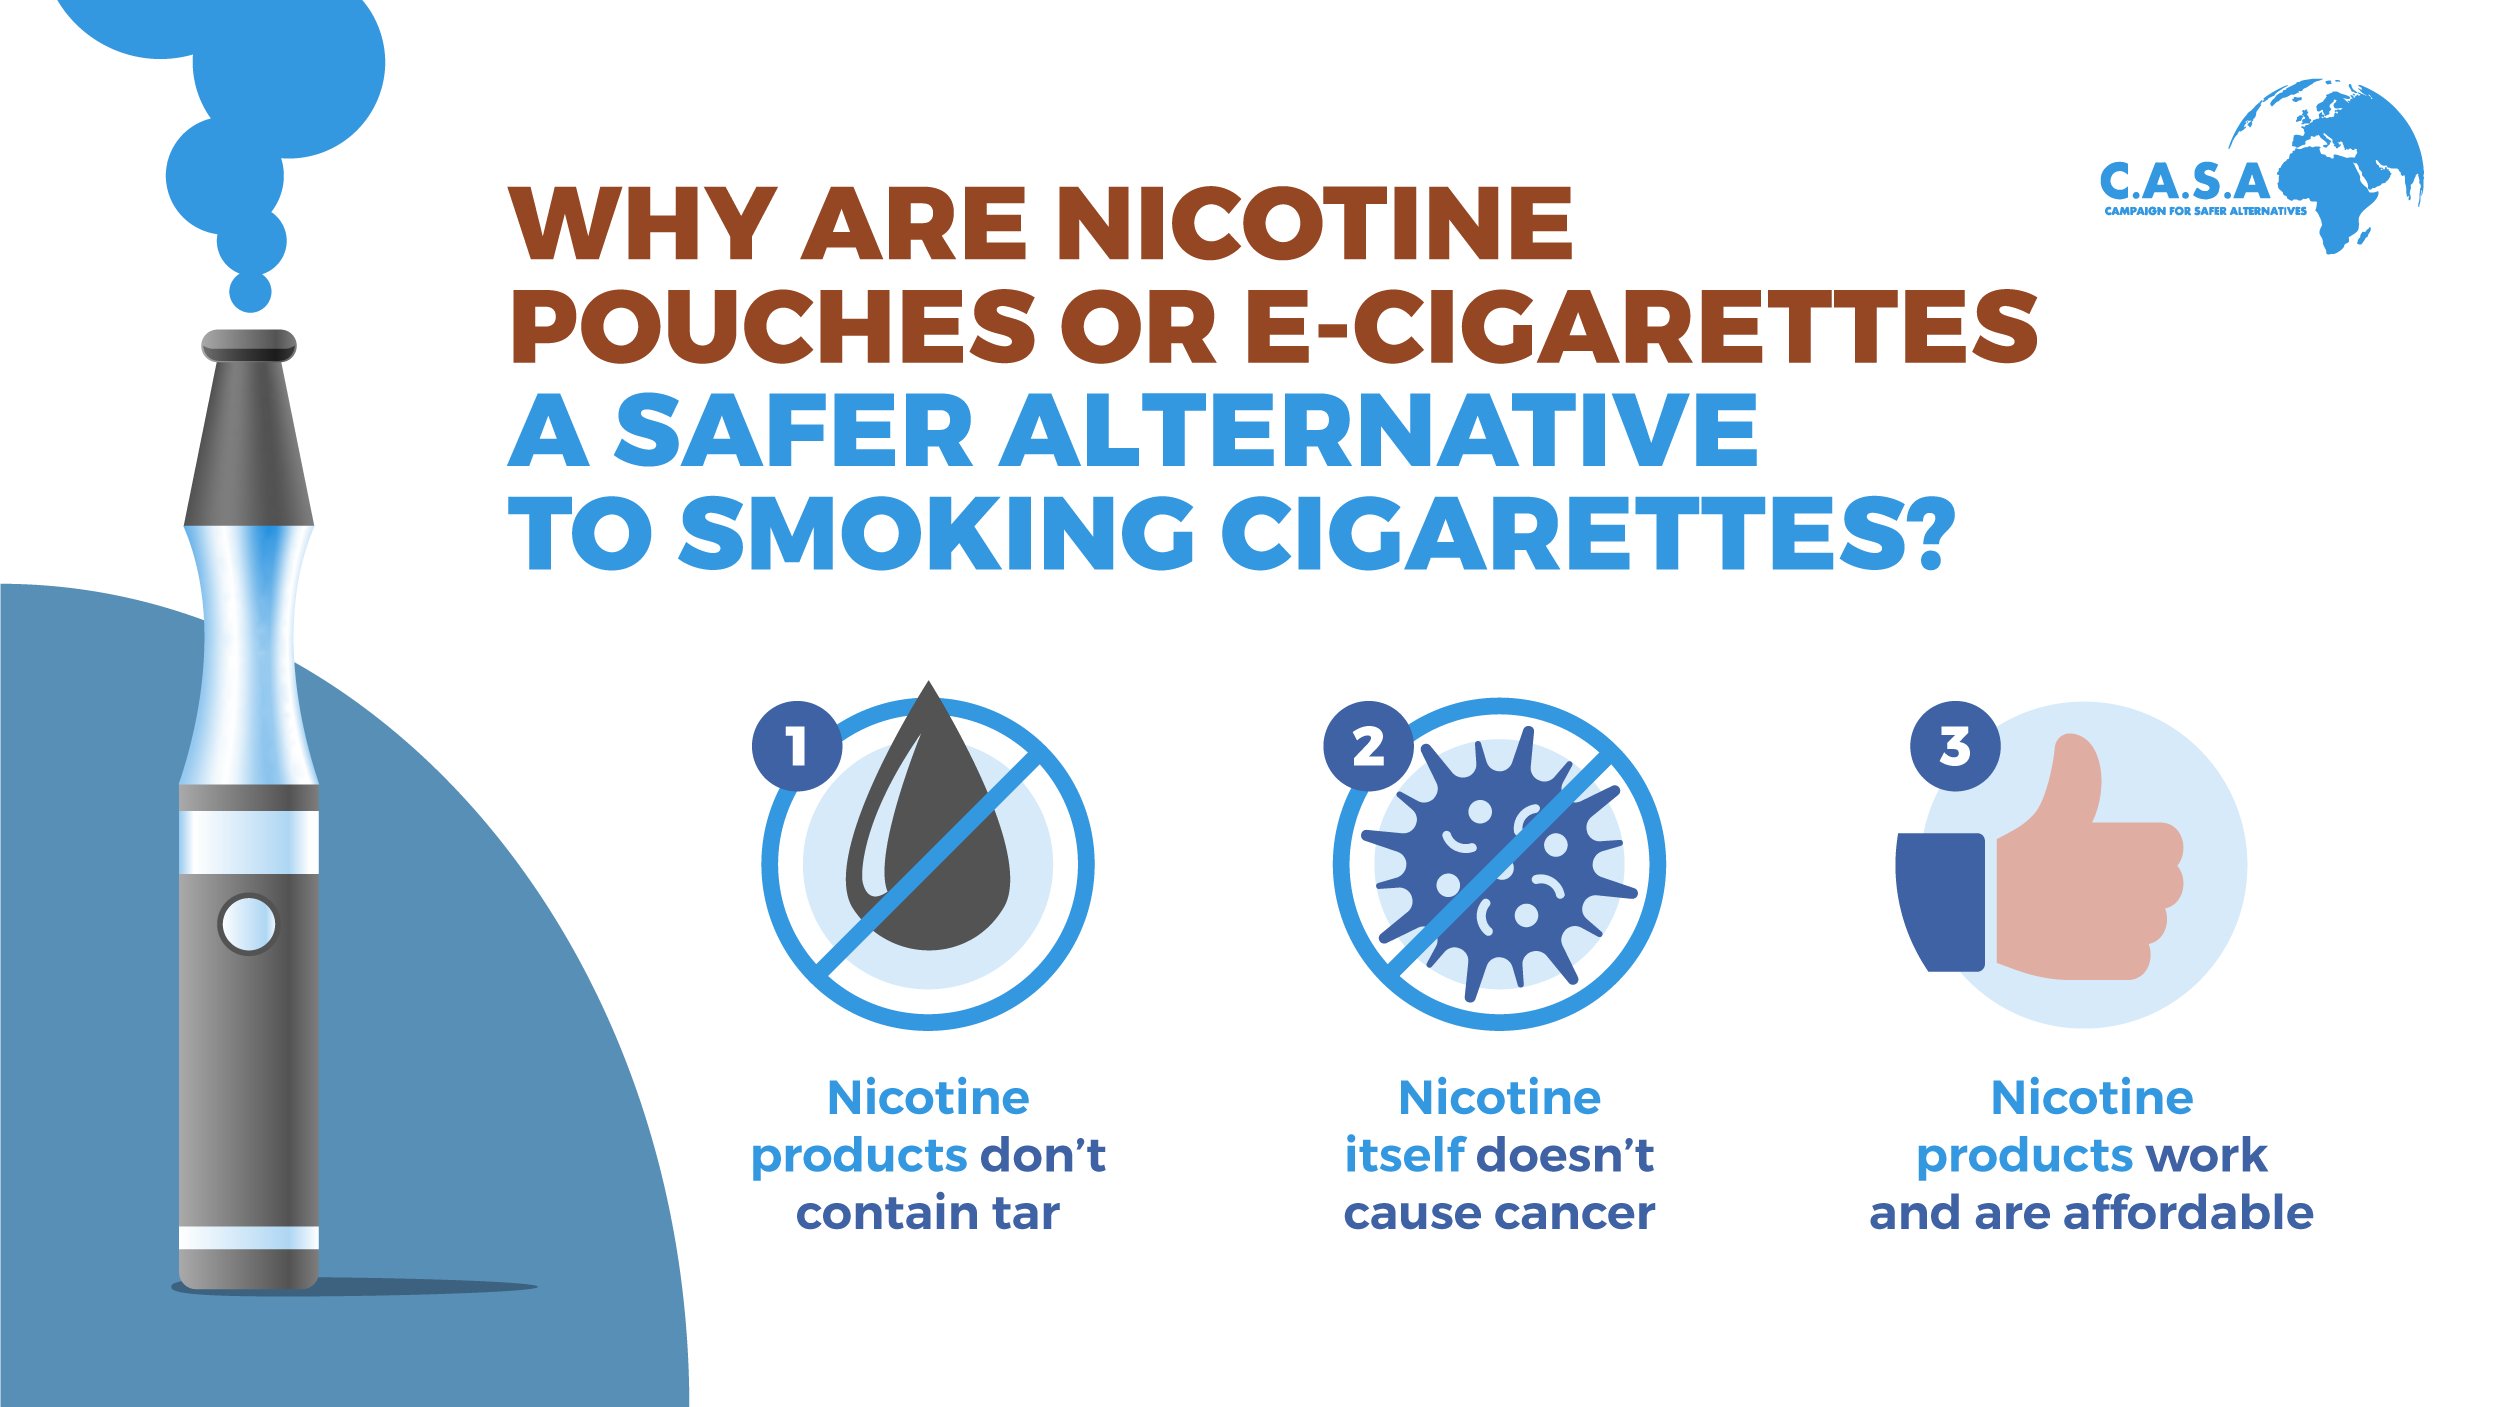 Is Nicotine a Carcinogen?